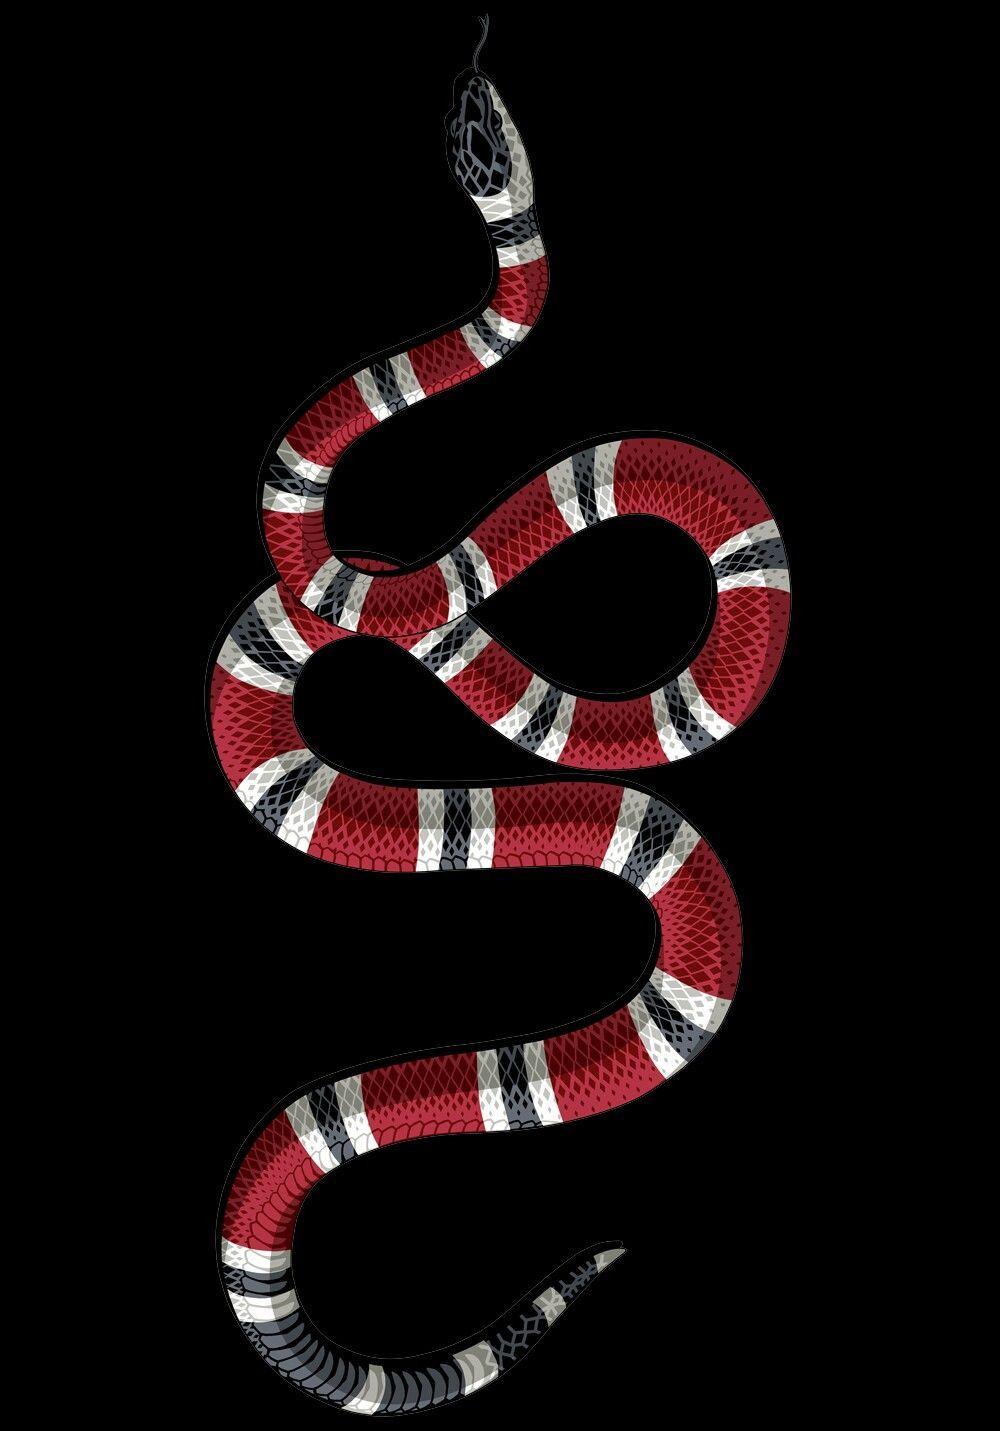 Gucci Snakes Logo - Pin by Sam Gomez on Graphic Design in 2019 | Iphone wallpaper, Gucci ...